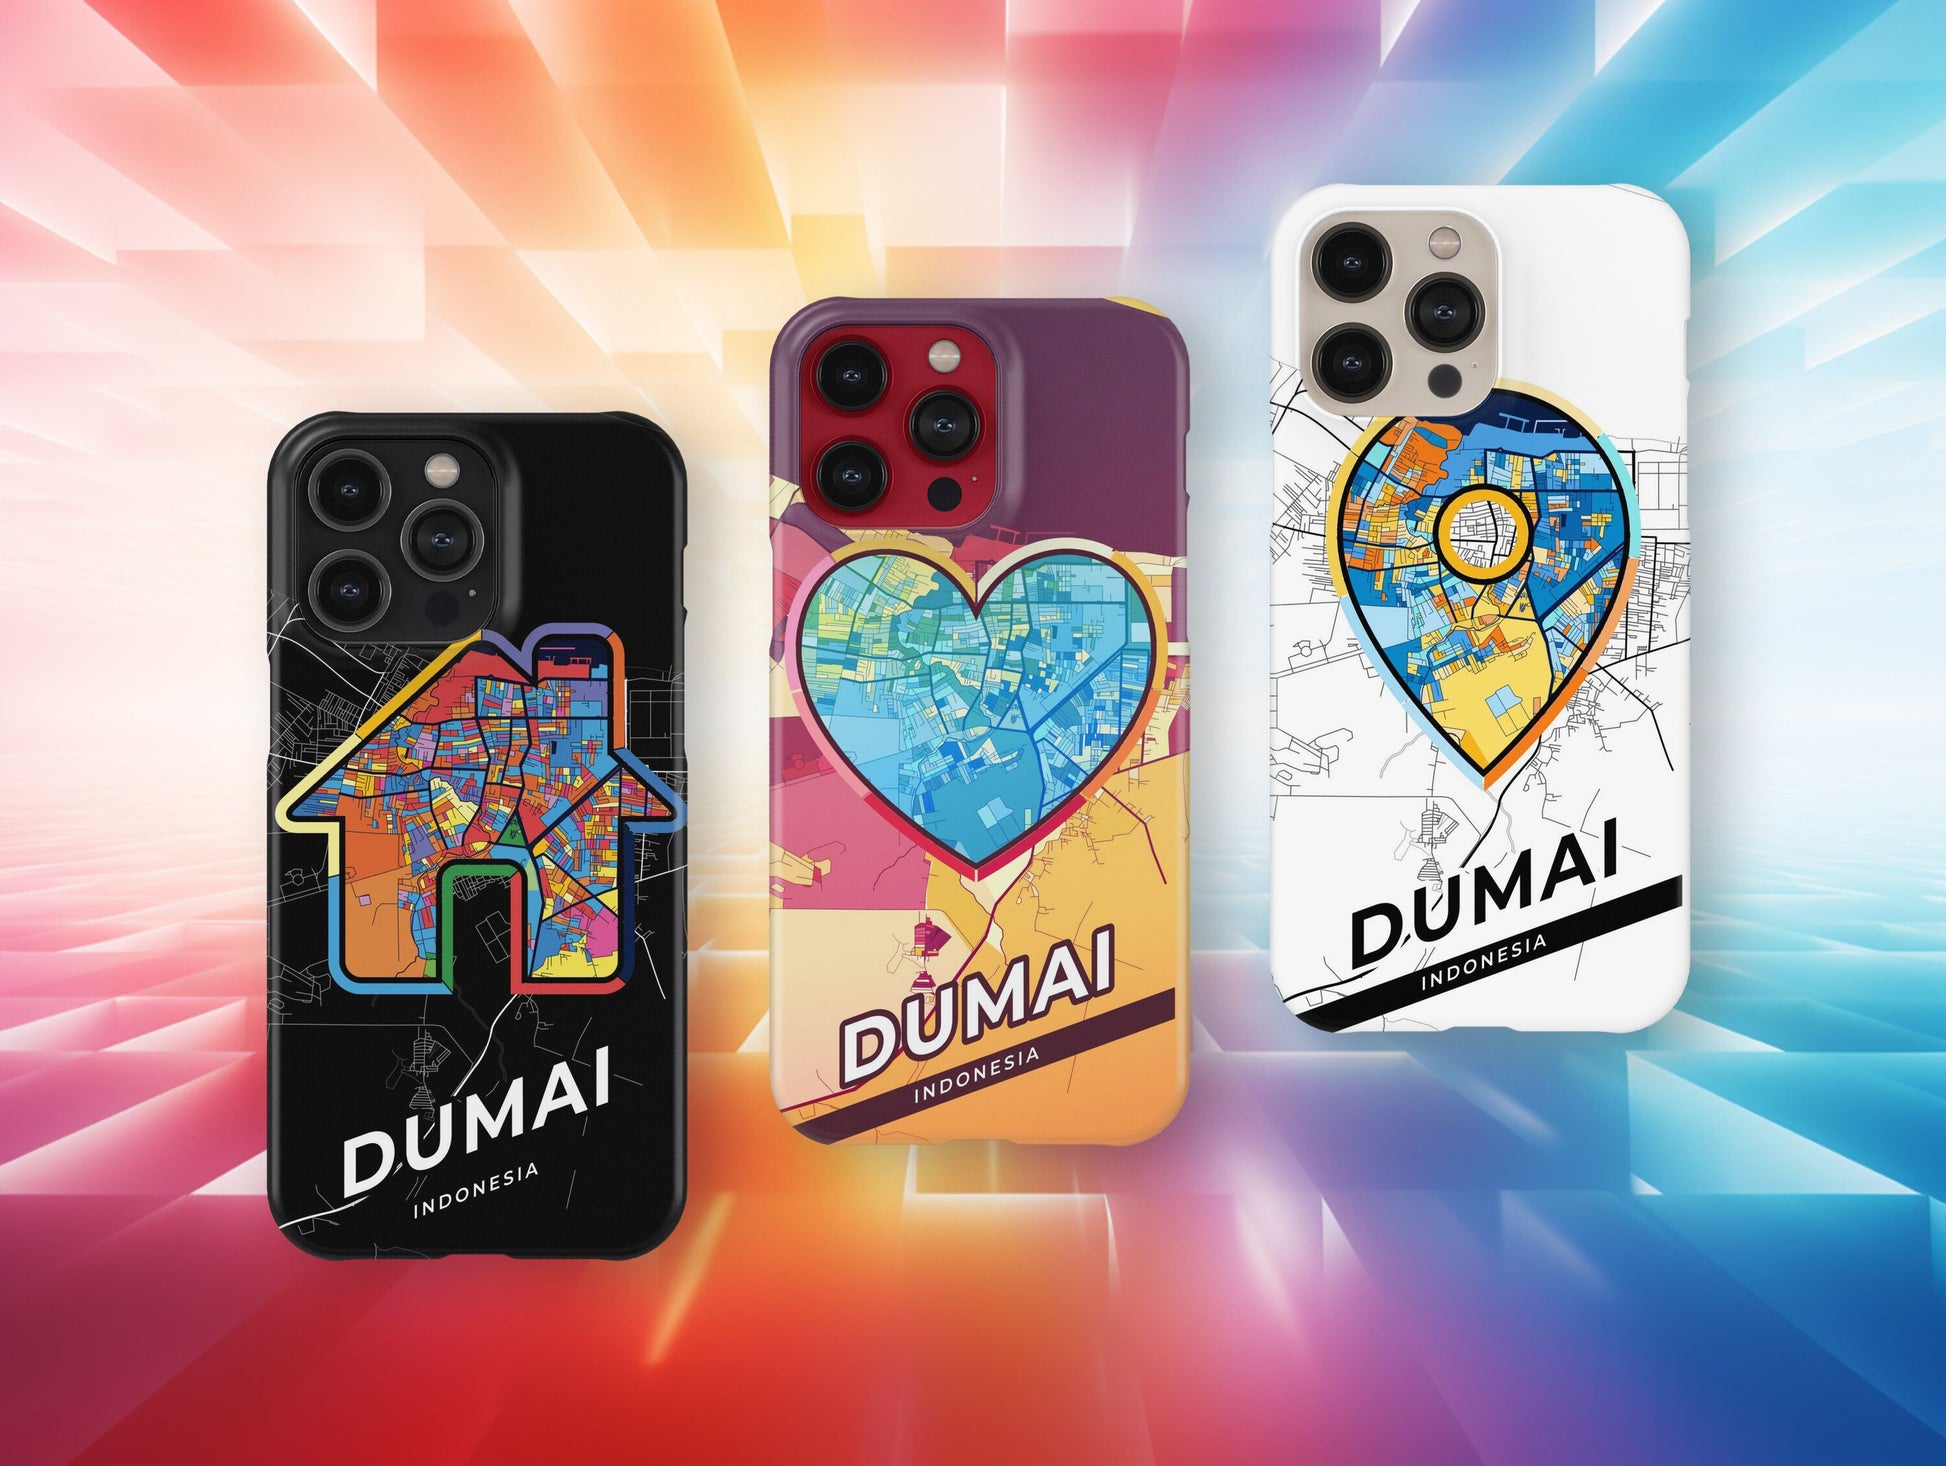 Dumai Indonesia slim phone case with colorful icon. Birthday, wedding or housewarming gift. Couple match cases.